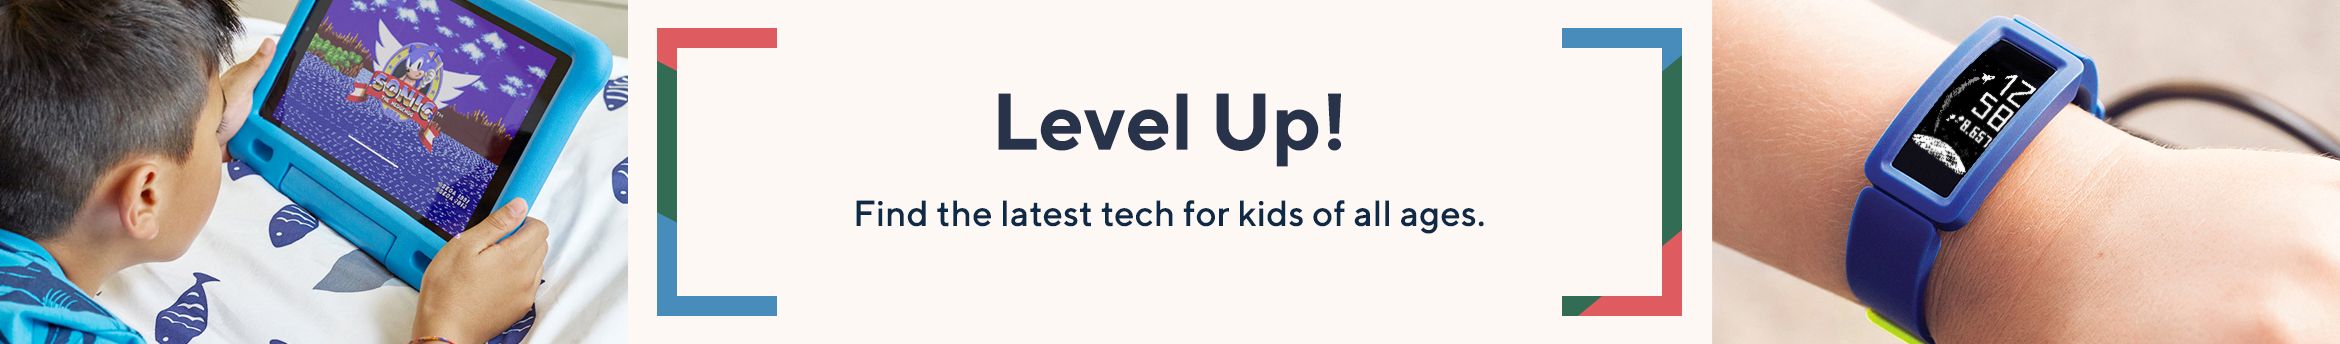 Level Up! Find the latest tech for kids of all ages.